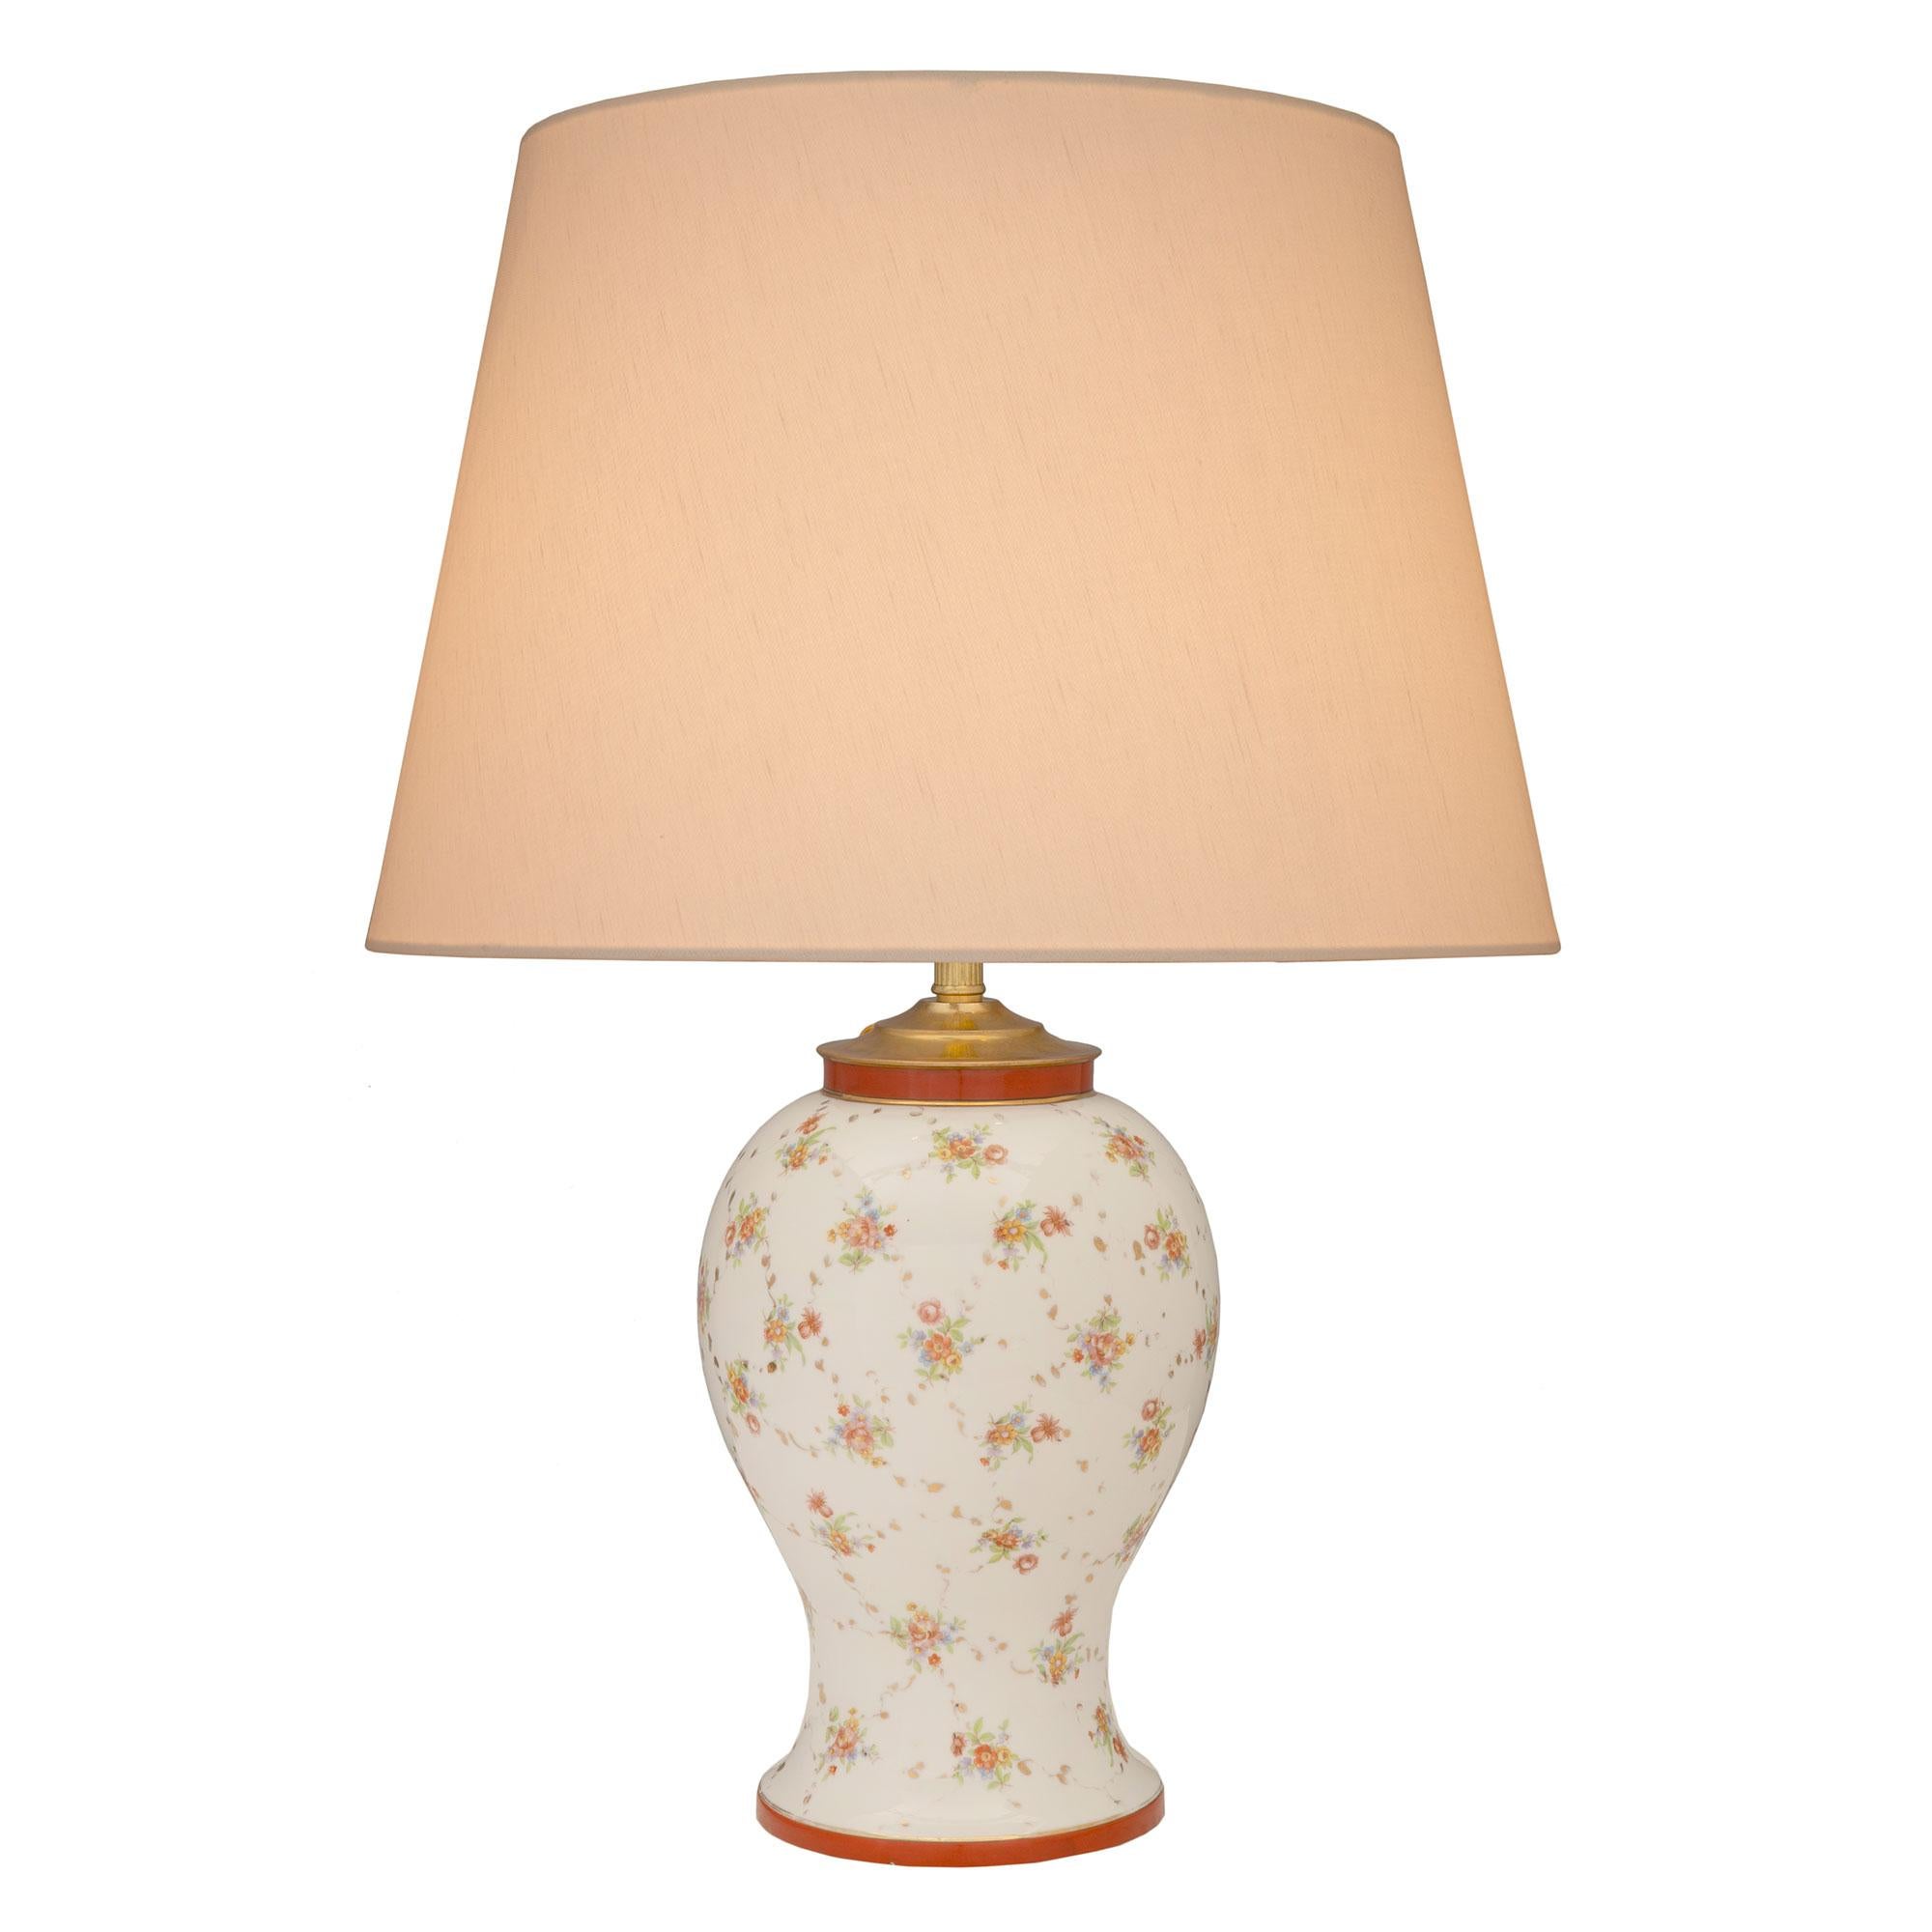 A charming French 19th century Louis XVI st. porcelain lamp. The lamp displays a beautiful and very elegant porcelain body with a lovely baluster shape. The body showcases charming and finely detailed hand painted flowers throughout with gilt